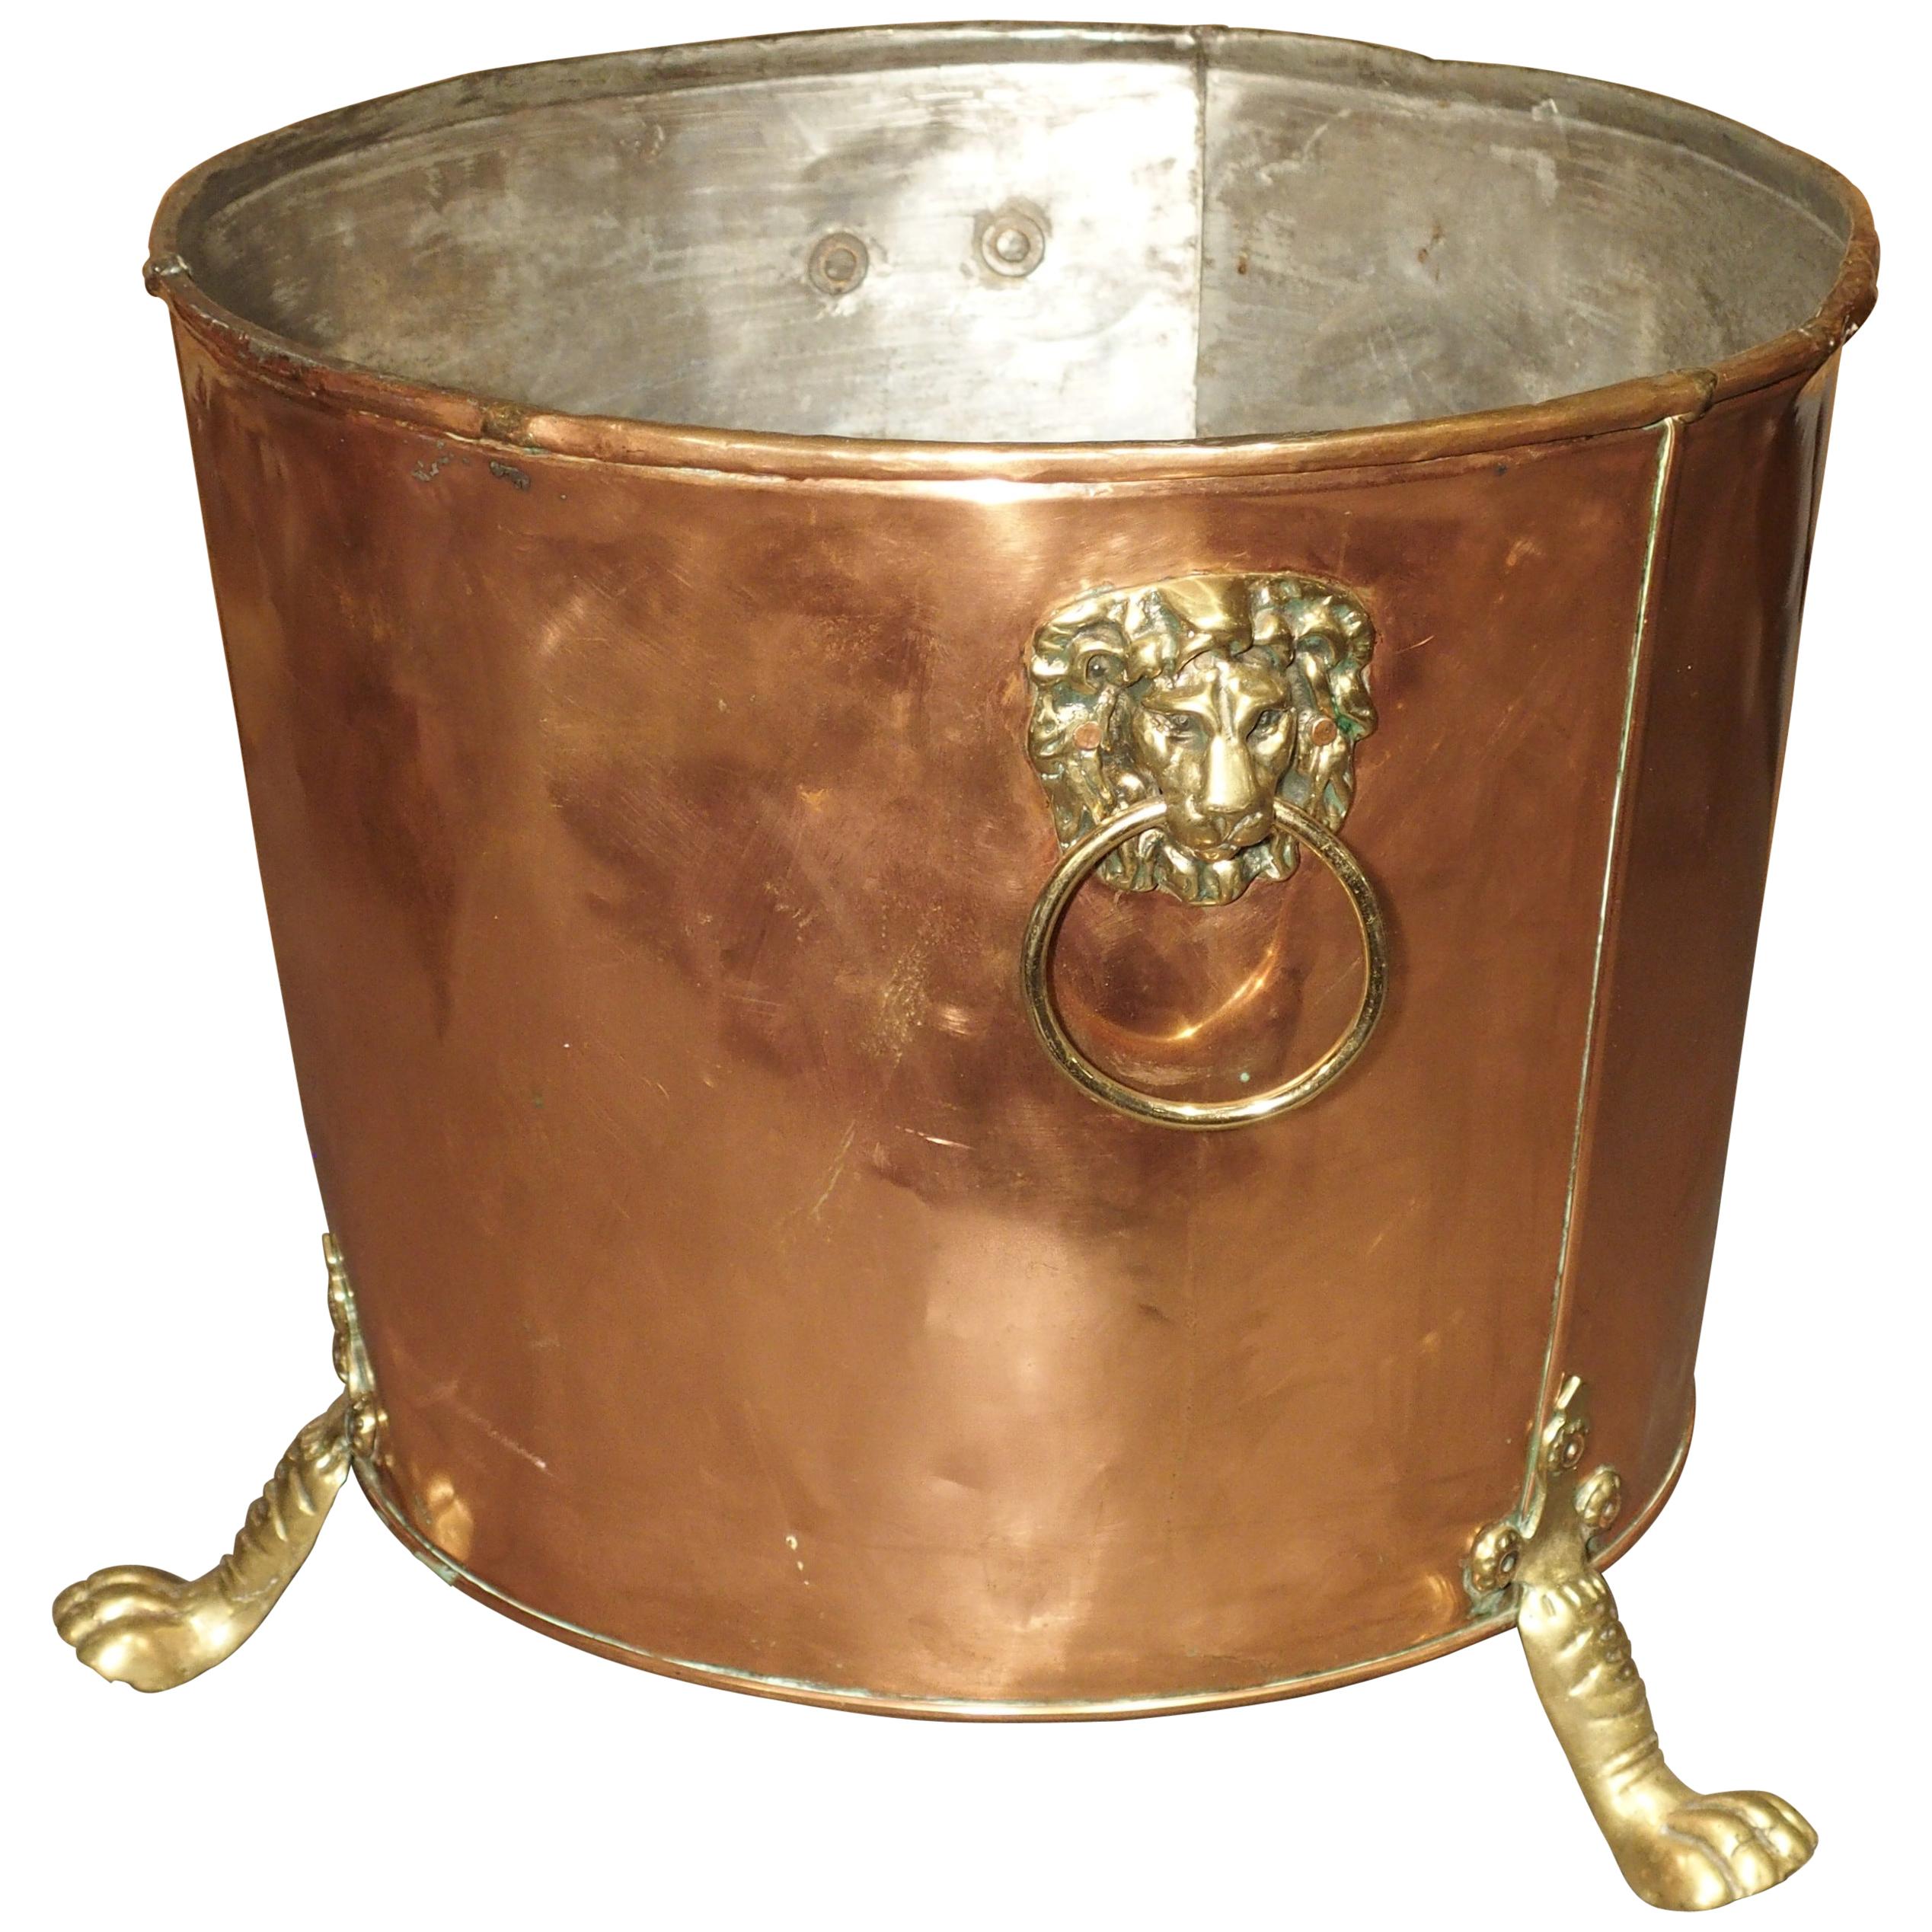 English Copper and Brass Log Bucket with Lion Head Ring Handles and Paw Feet